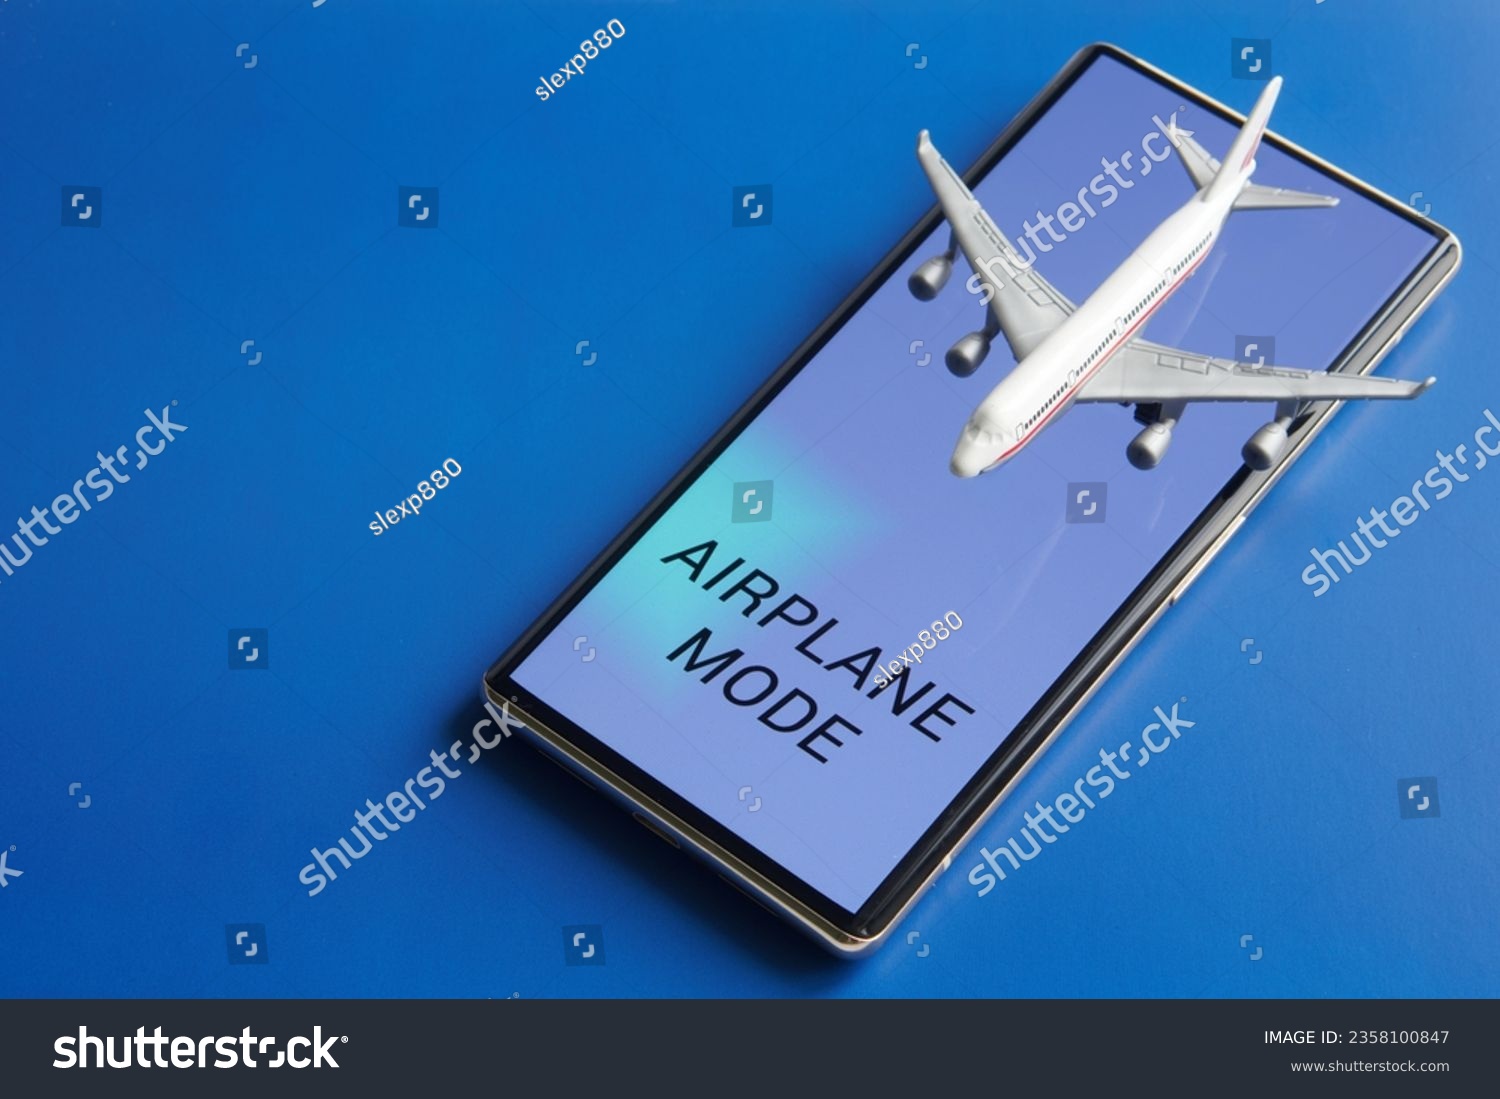 Mobile phone - smartphone with the inscription "Airplane mode" and toy passenger plane. Blue background. Disabling the communication functions of gadgets during an airplane flight. Photo. Close-up #2358100847